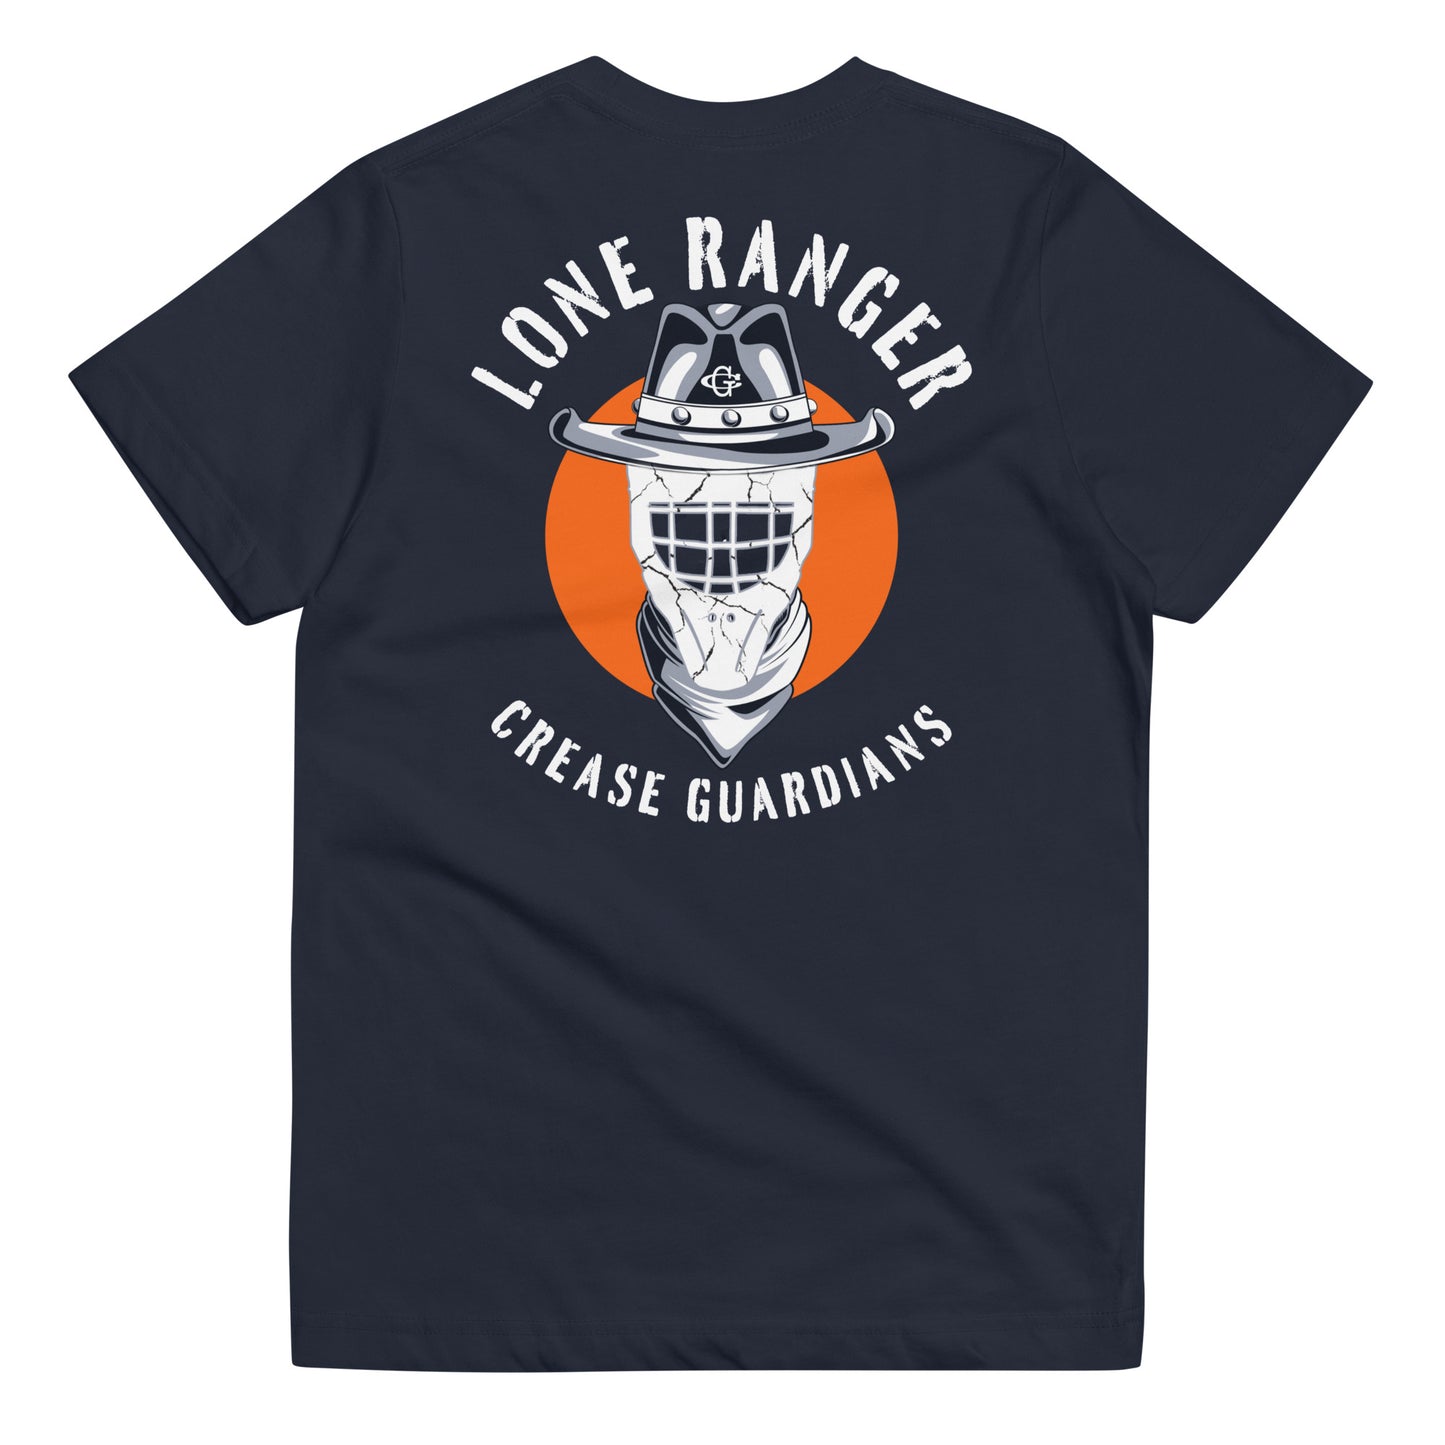 The Lone Ranger Youth t-shirt